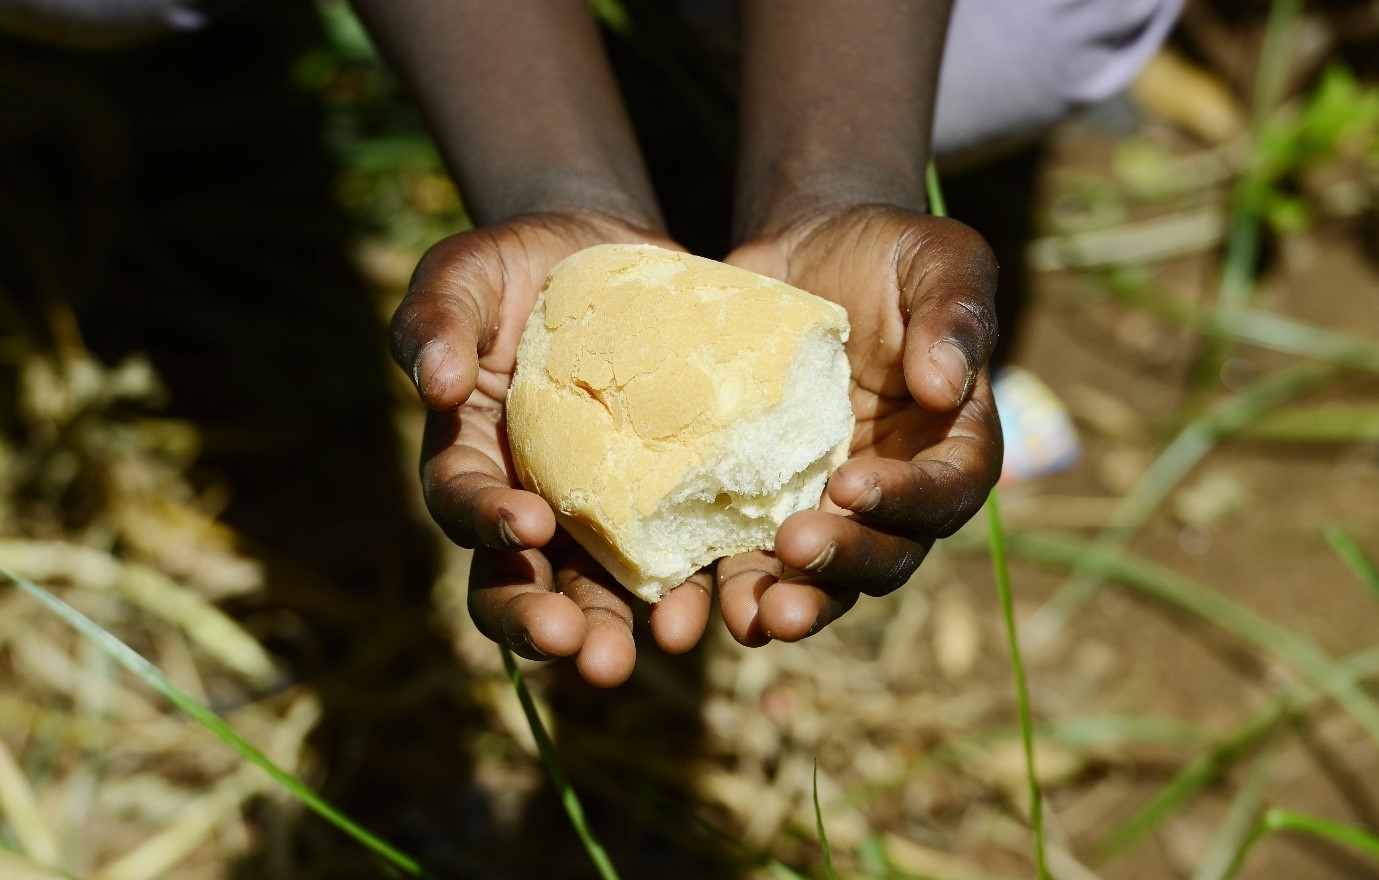 food insecurity in south africa essay